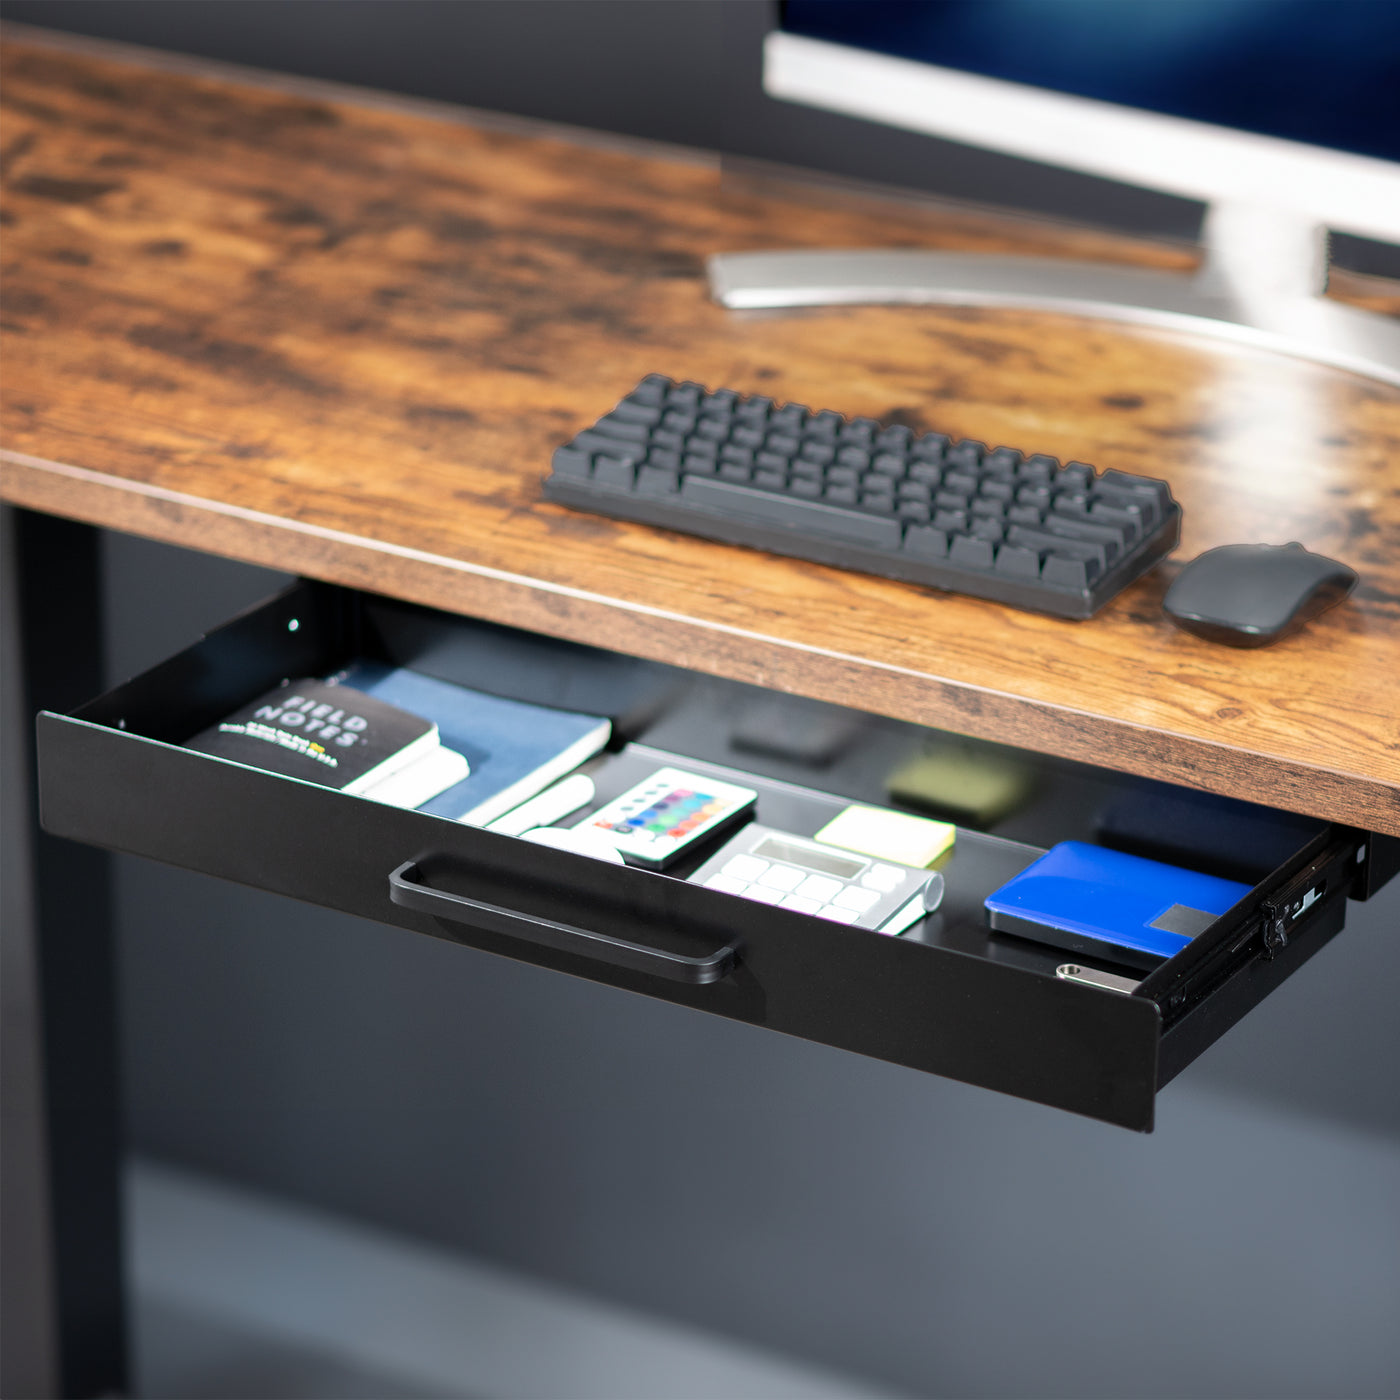 Low profile 22 inch under desk drawer with pull handle for convenient storage and organization.